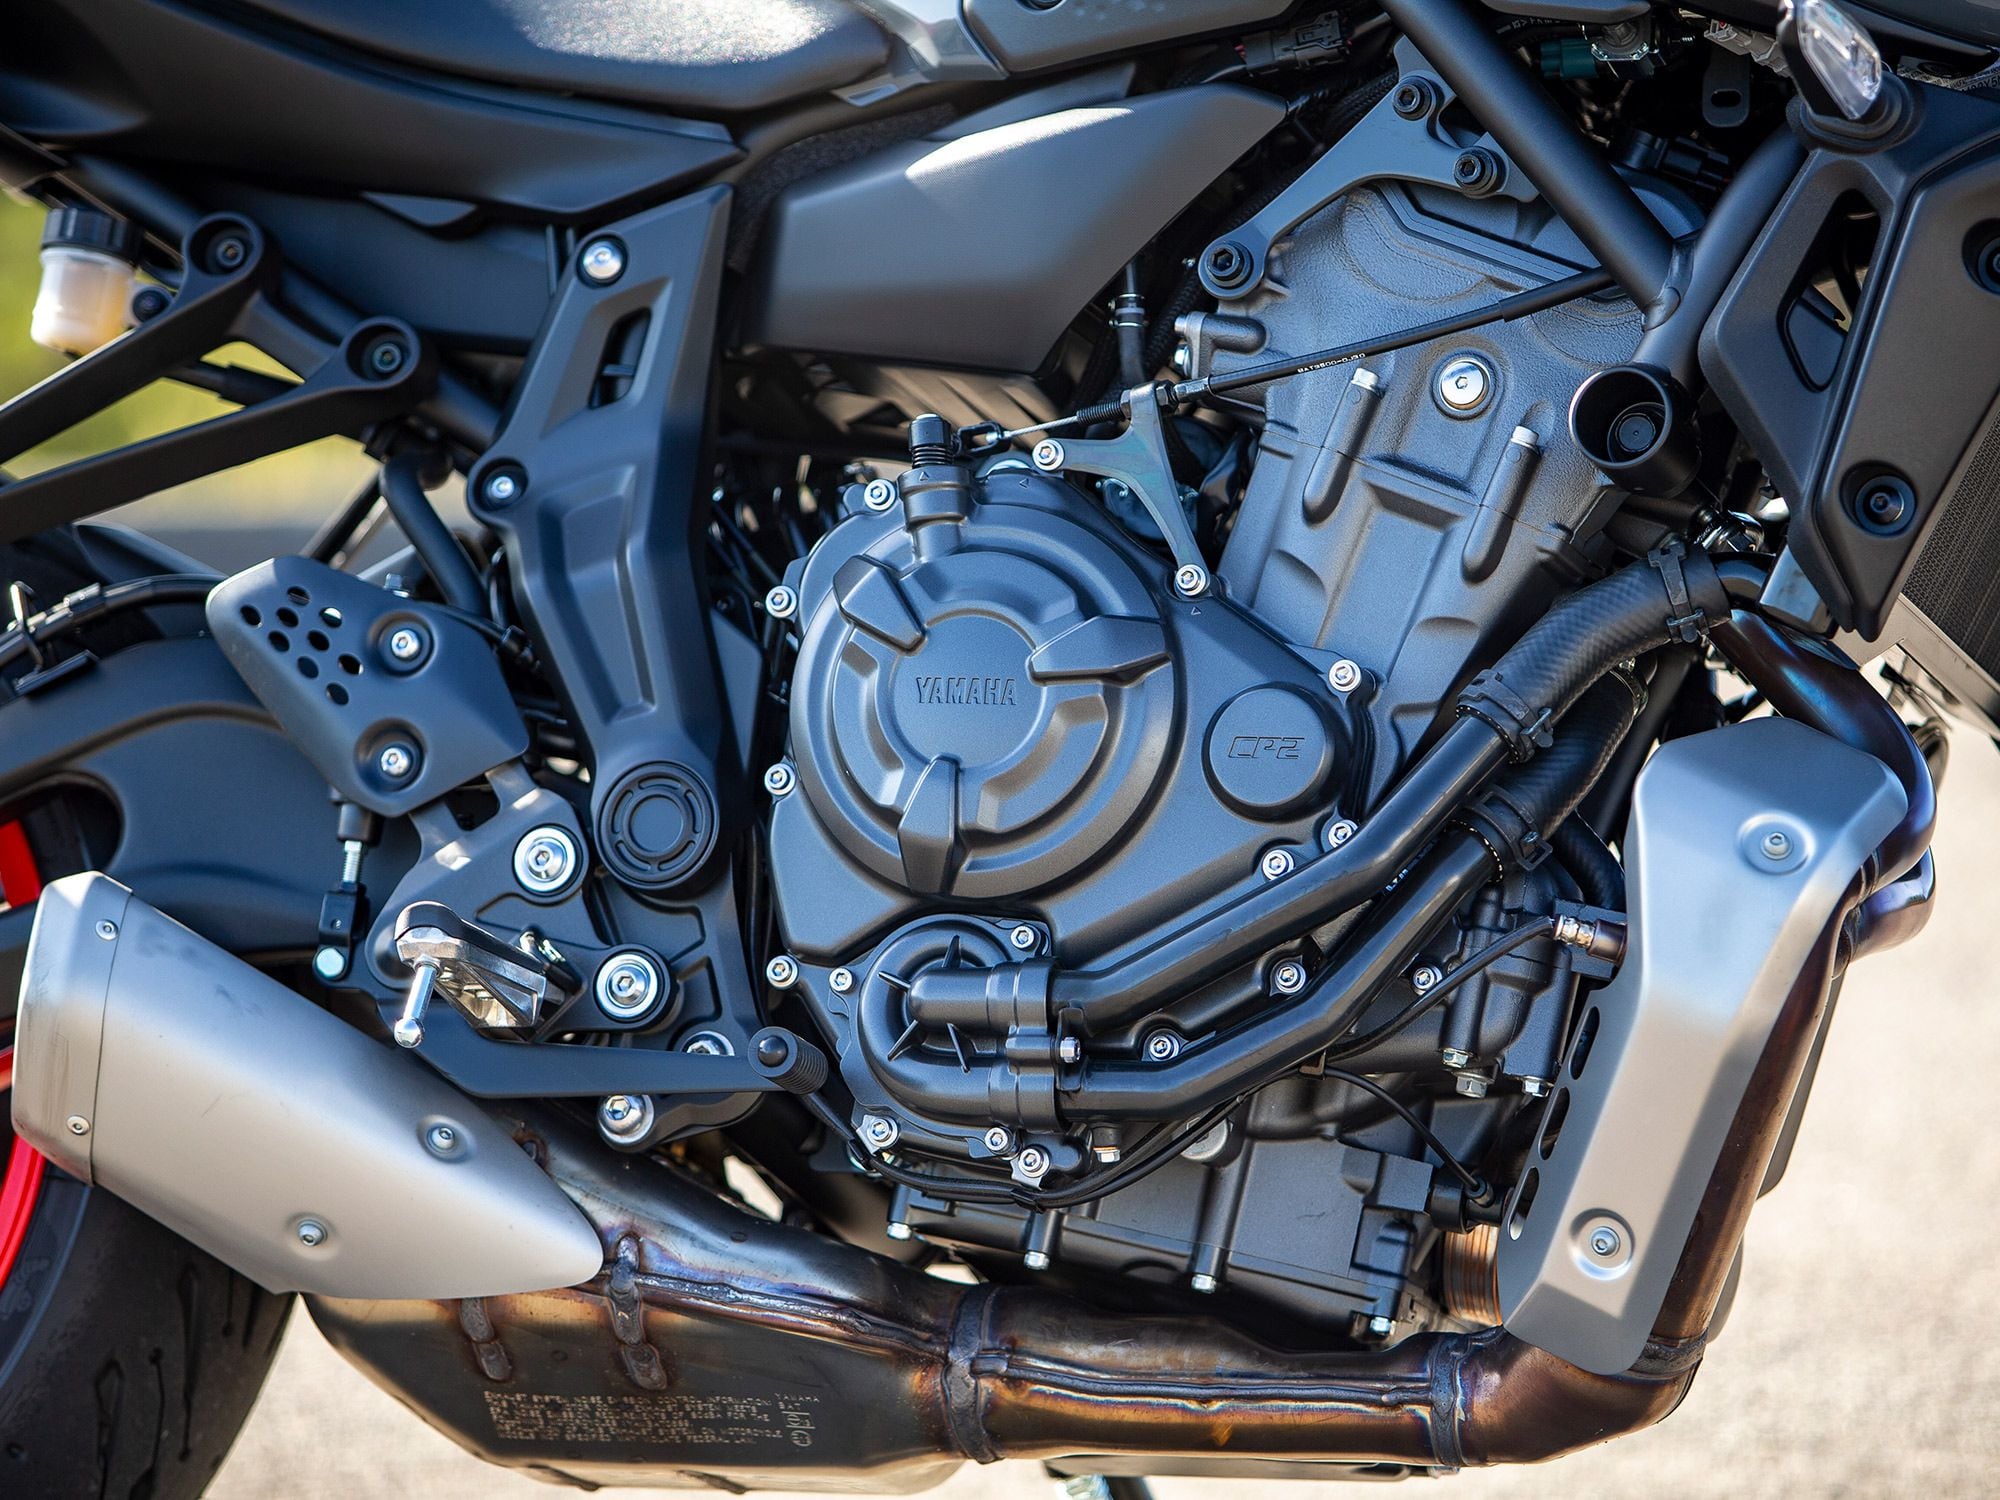 Yamaha’s plucky CP2 engine gets updates to conform to Euro 5 regulations.